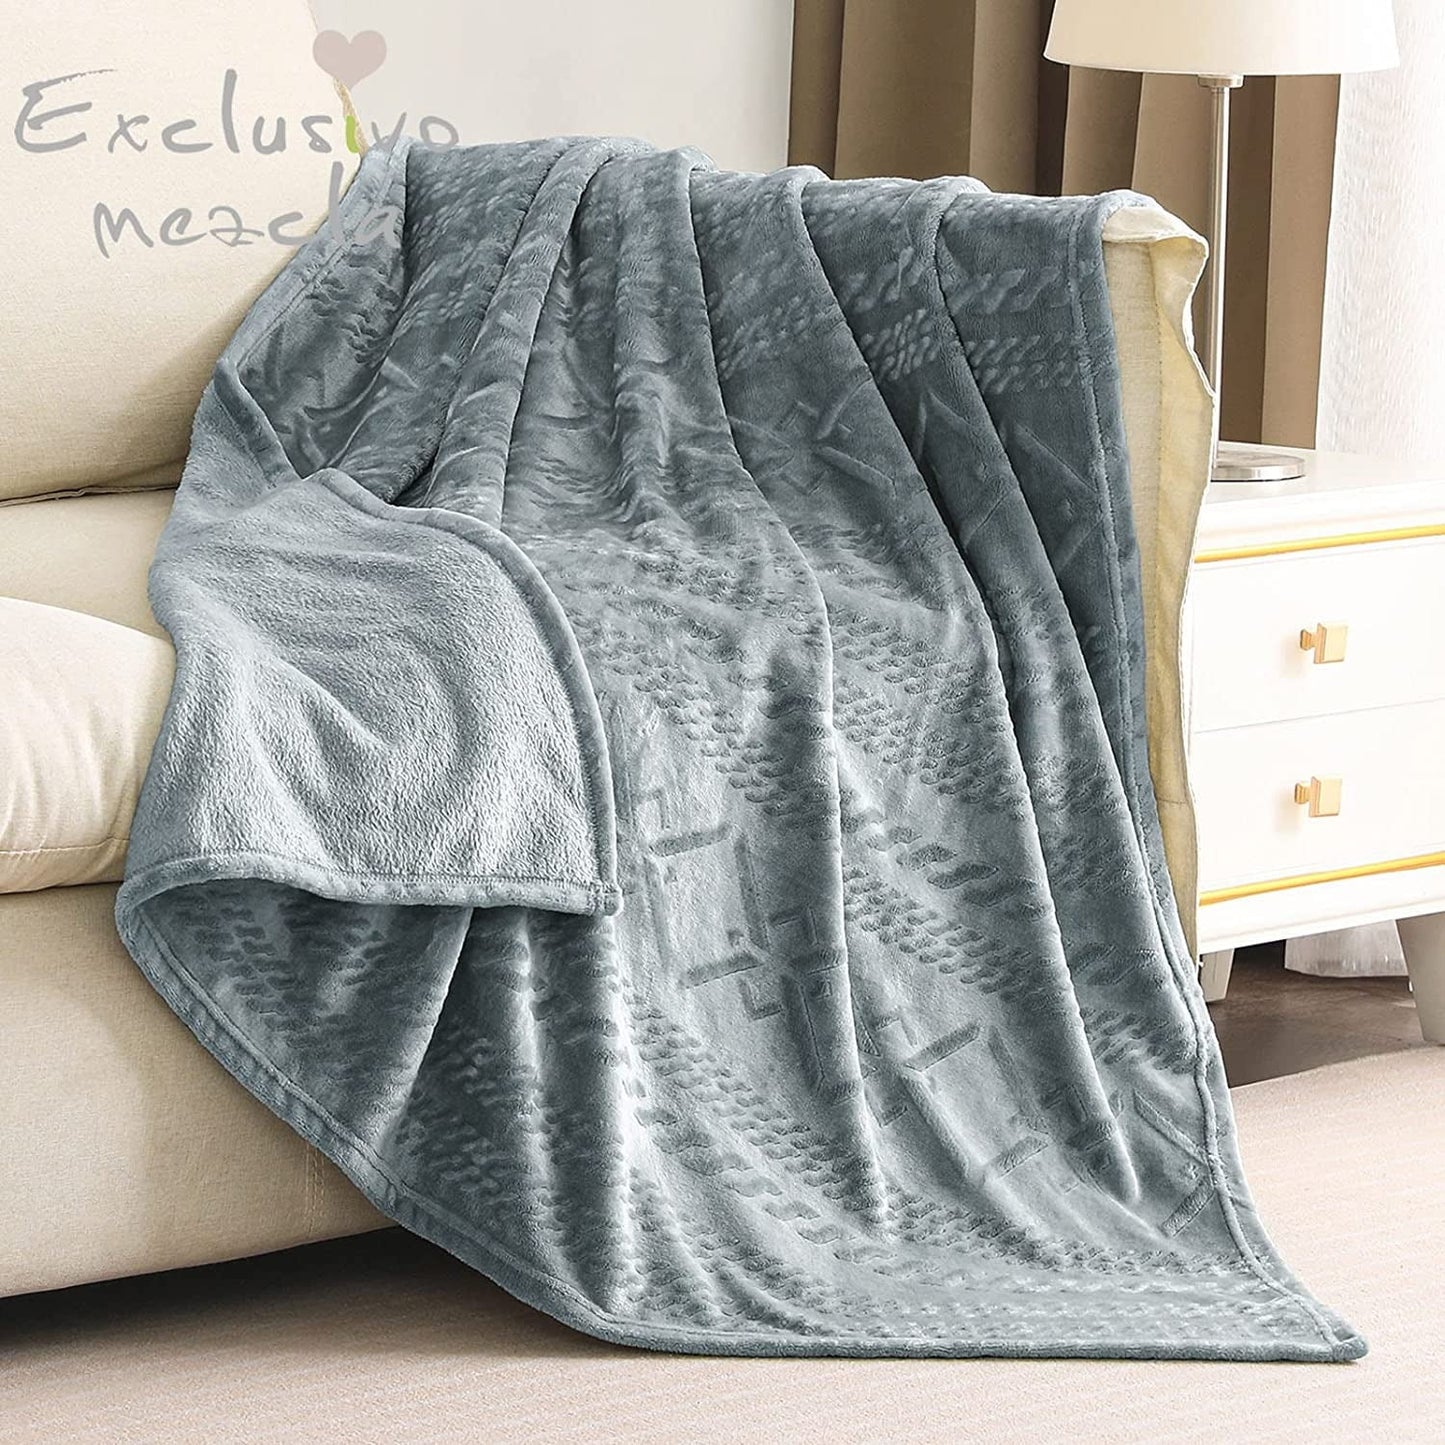 Exclusivo Mezcla Soft Throw Blanket, Large Fuzzy Fleece Blanket, Decorative Geometry Pattern Plush Throw Blanket for Couch/Sofa/Bed, 50x60 Inches,Silver Grey